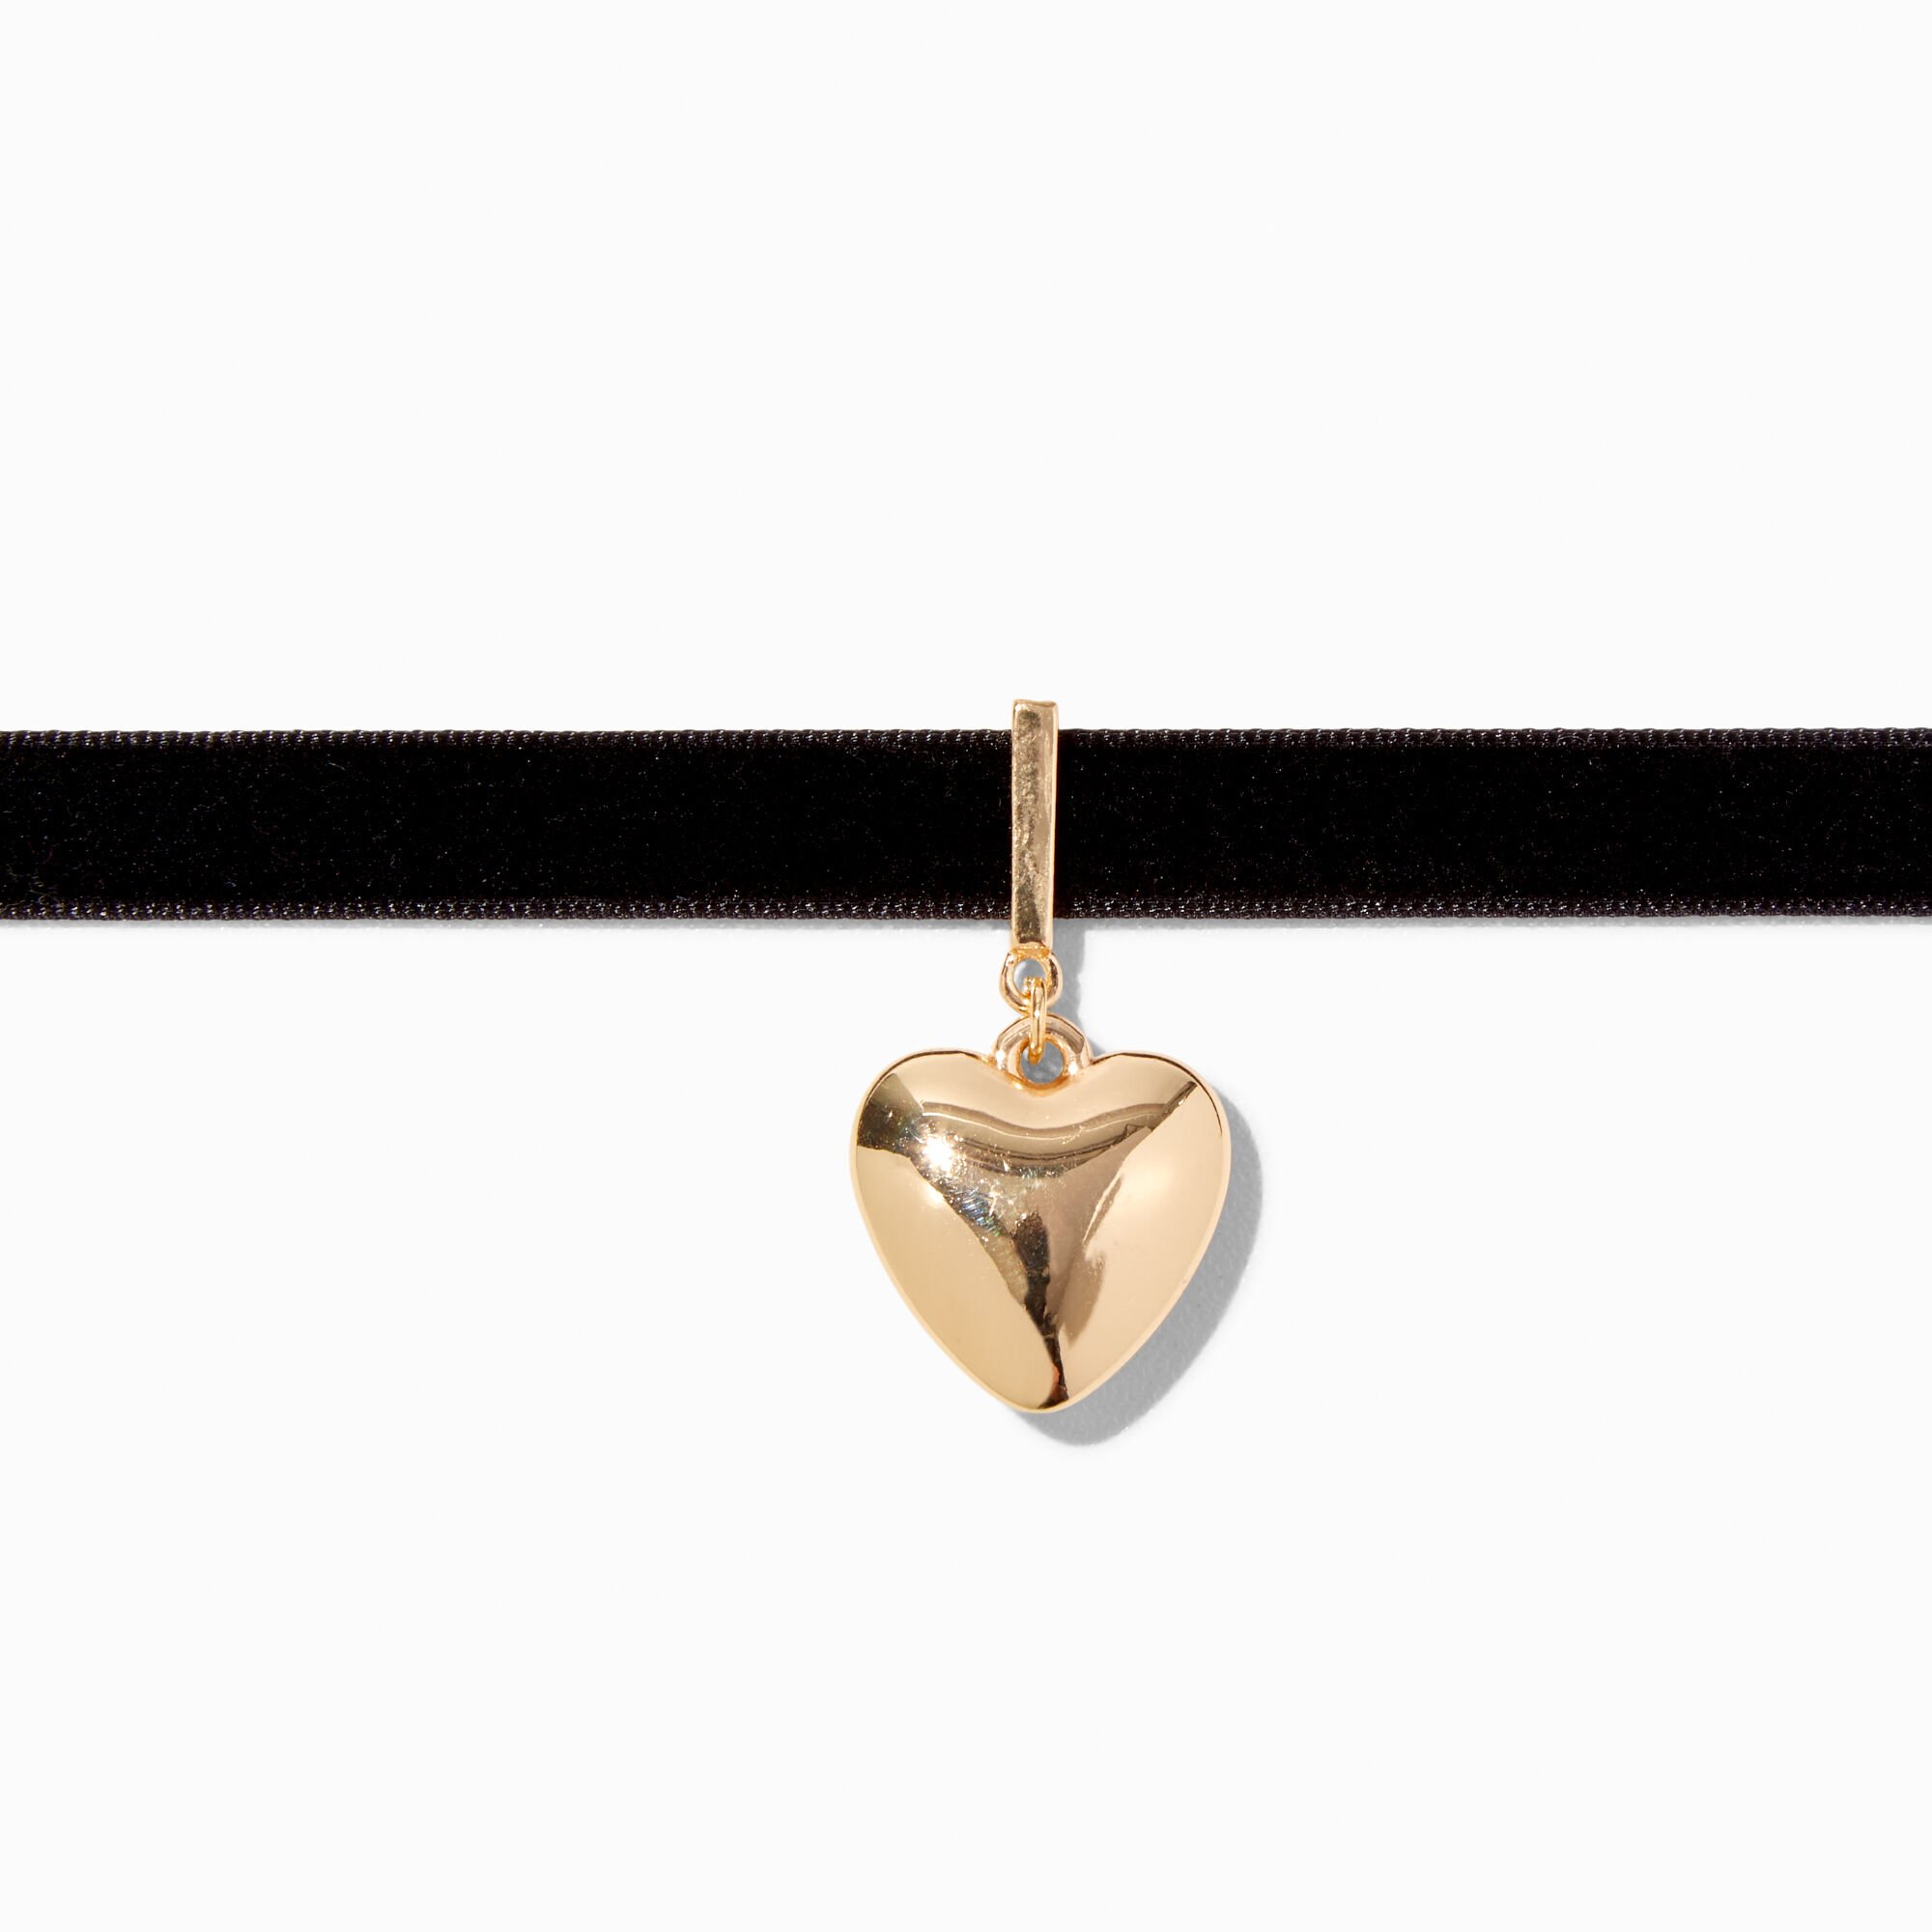 View Claires GoldTone Puffy Heart Velvet Choker Necklace Black information